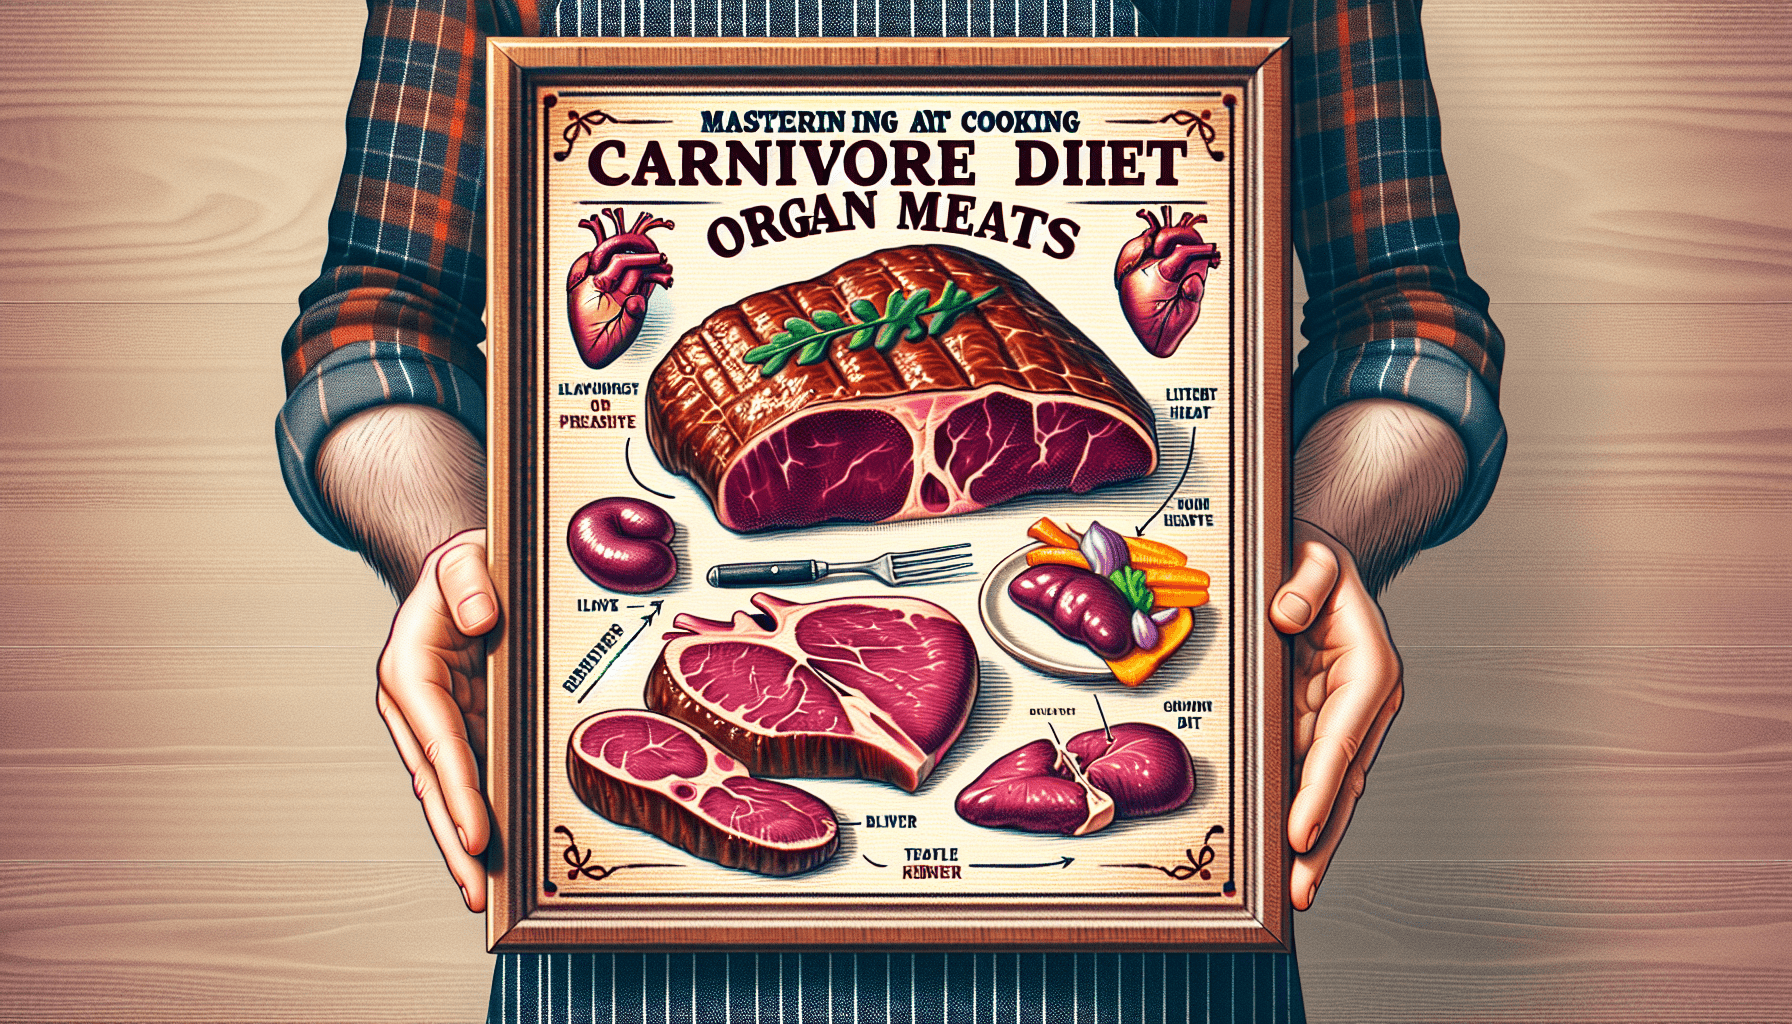 Mastering the Art of Cooking Carnivore Diet Organ Meats